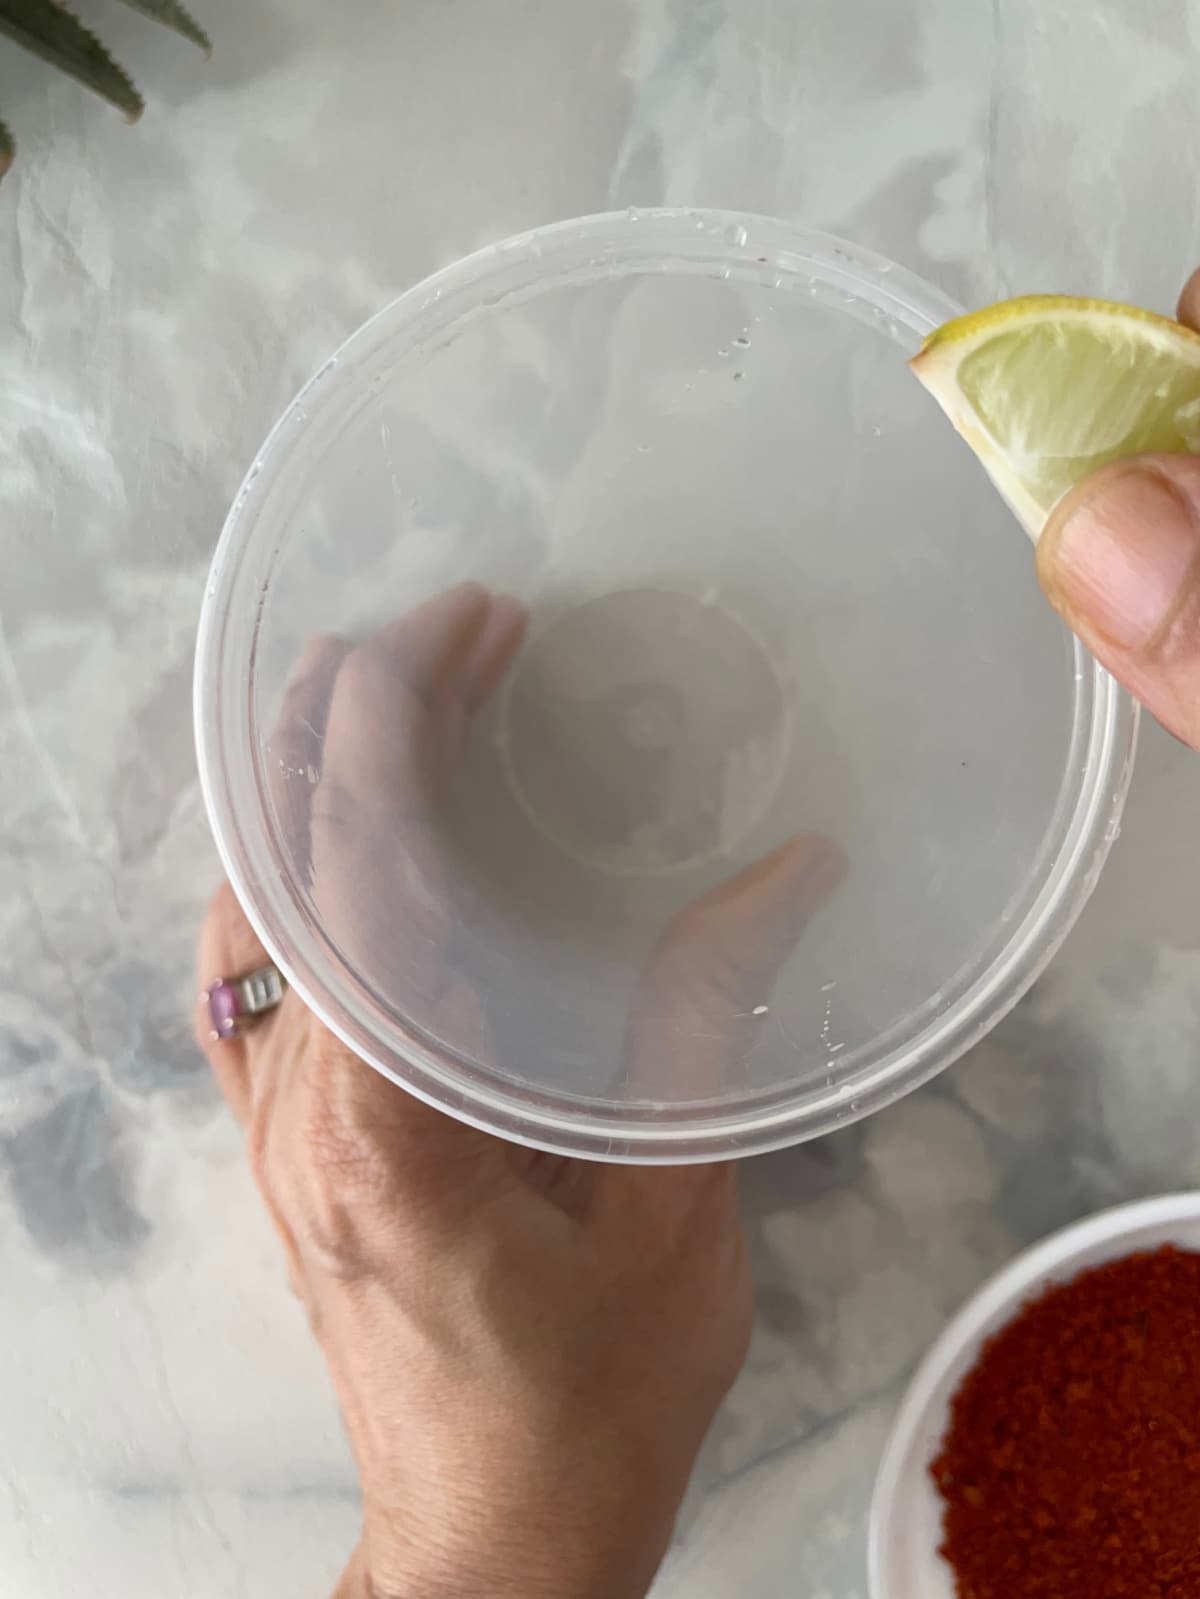 A yellow lime wedge being used to wet the rim of a plastic cup